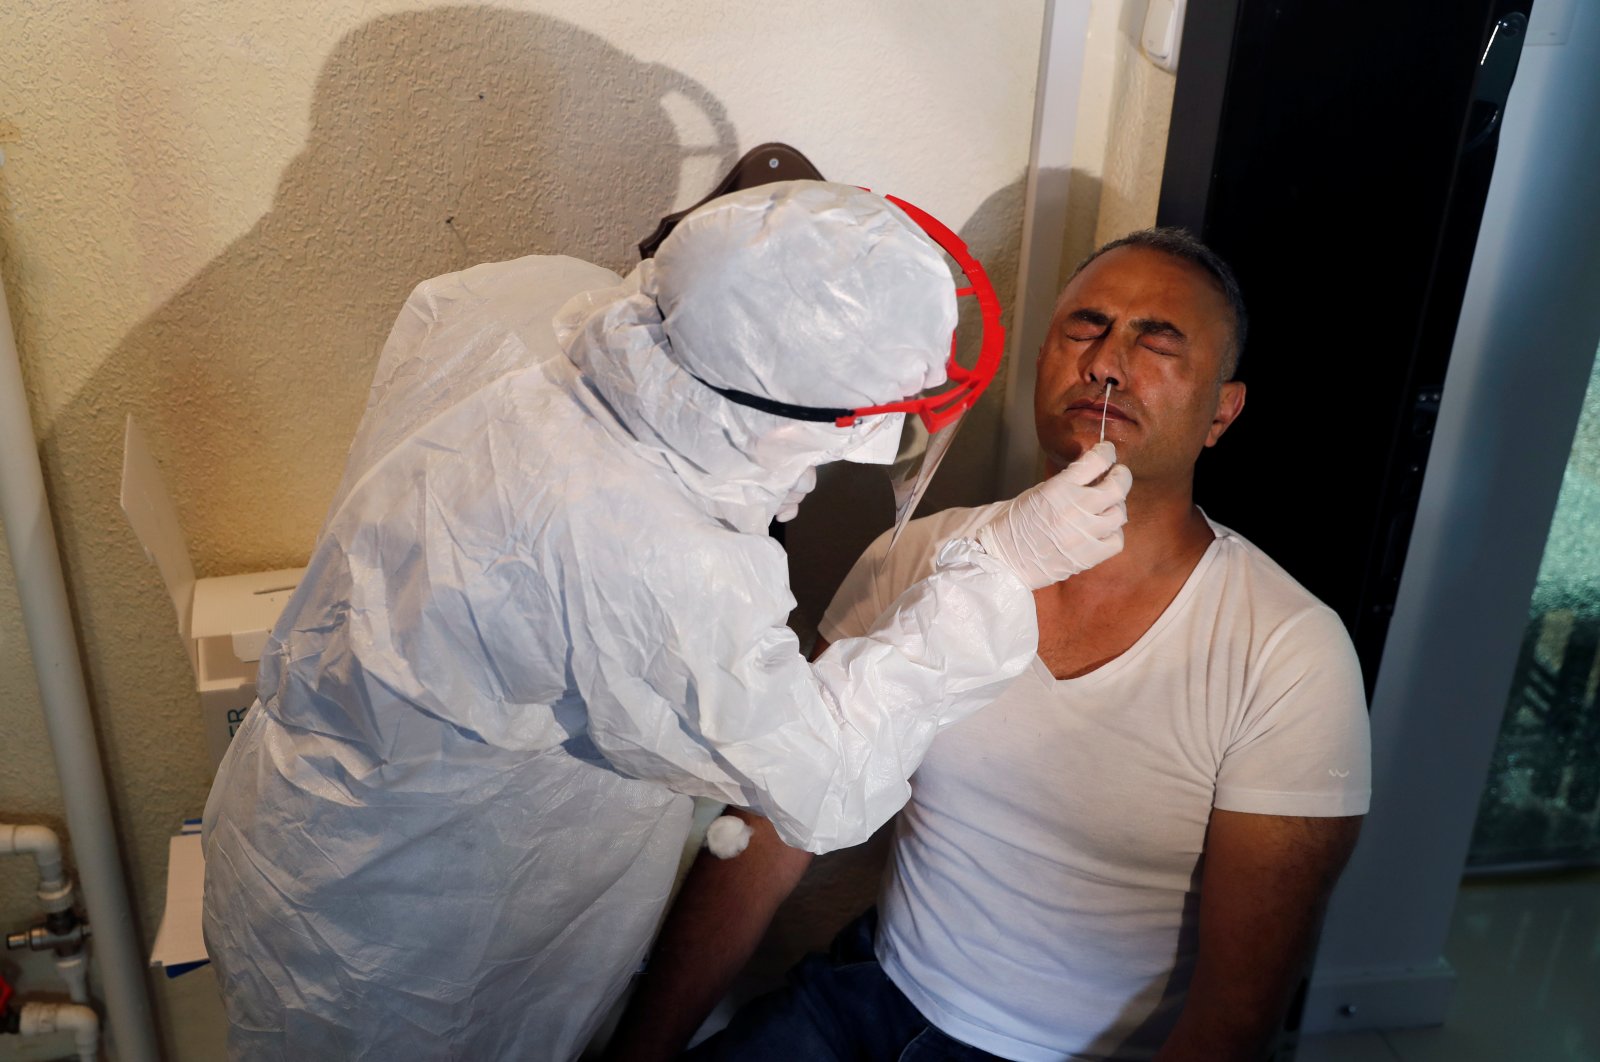 A medical worker takes a swab sample from a man during an antibody testing program against COVID-19, in Istanbul, Turkey, June 17, 2020. (REUTERS Photo) 